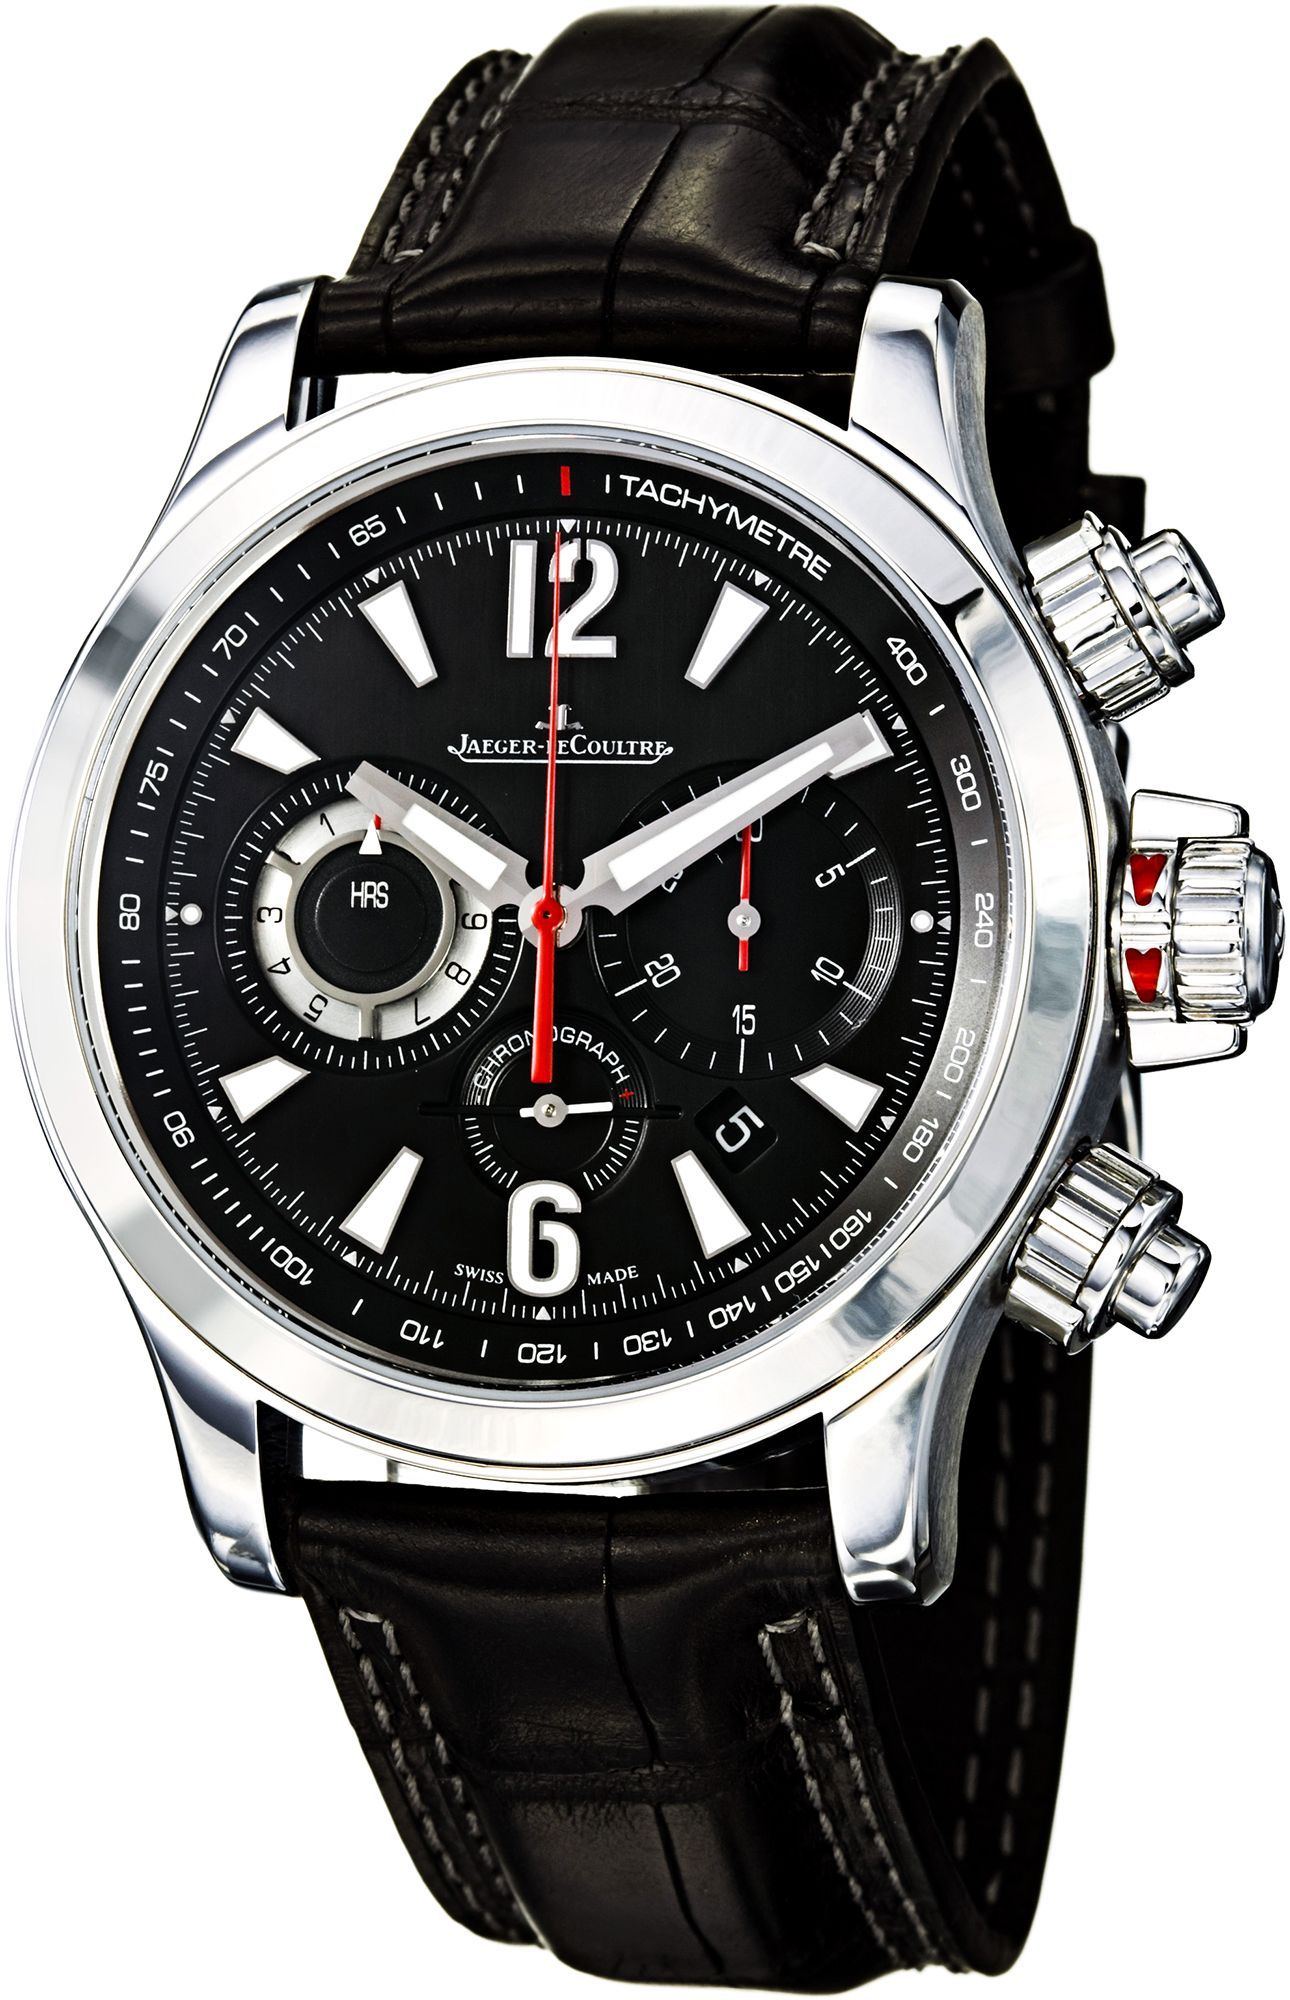 Jaeger-LeCoultre Master Master Compressor Chronograph 2 Black Dial 41.5 mm Automatic Watch For Men - 1